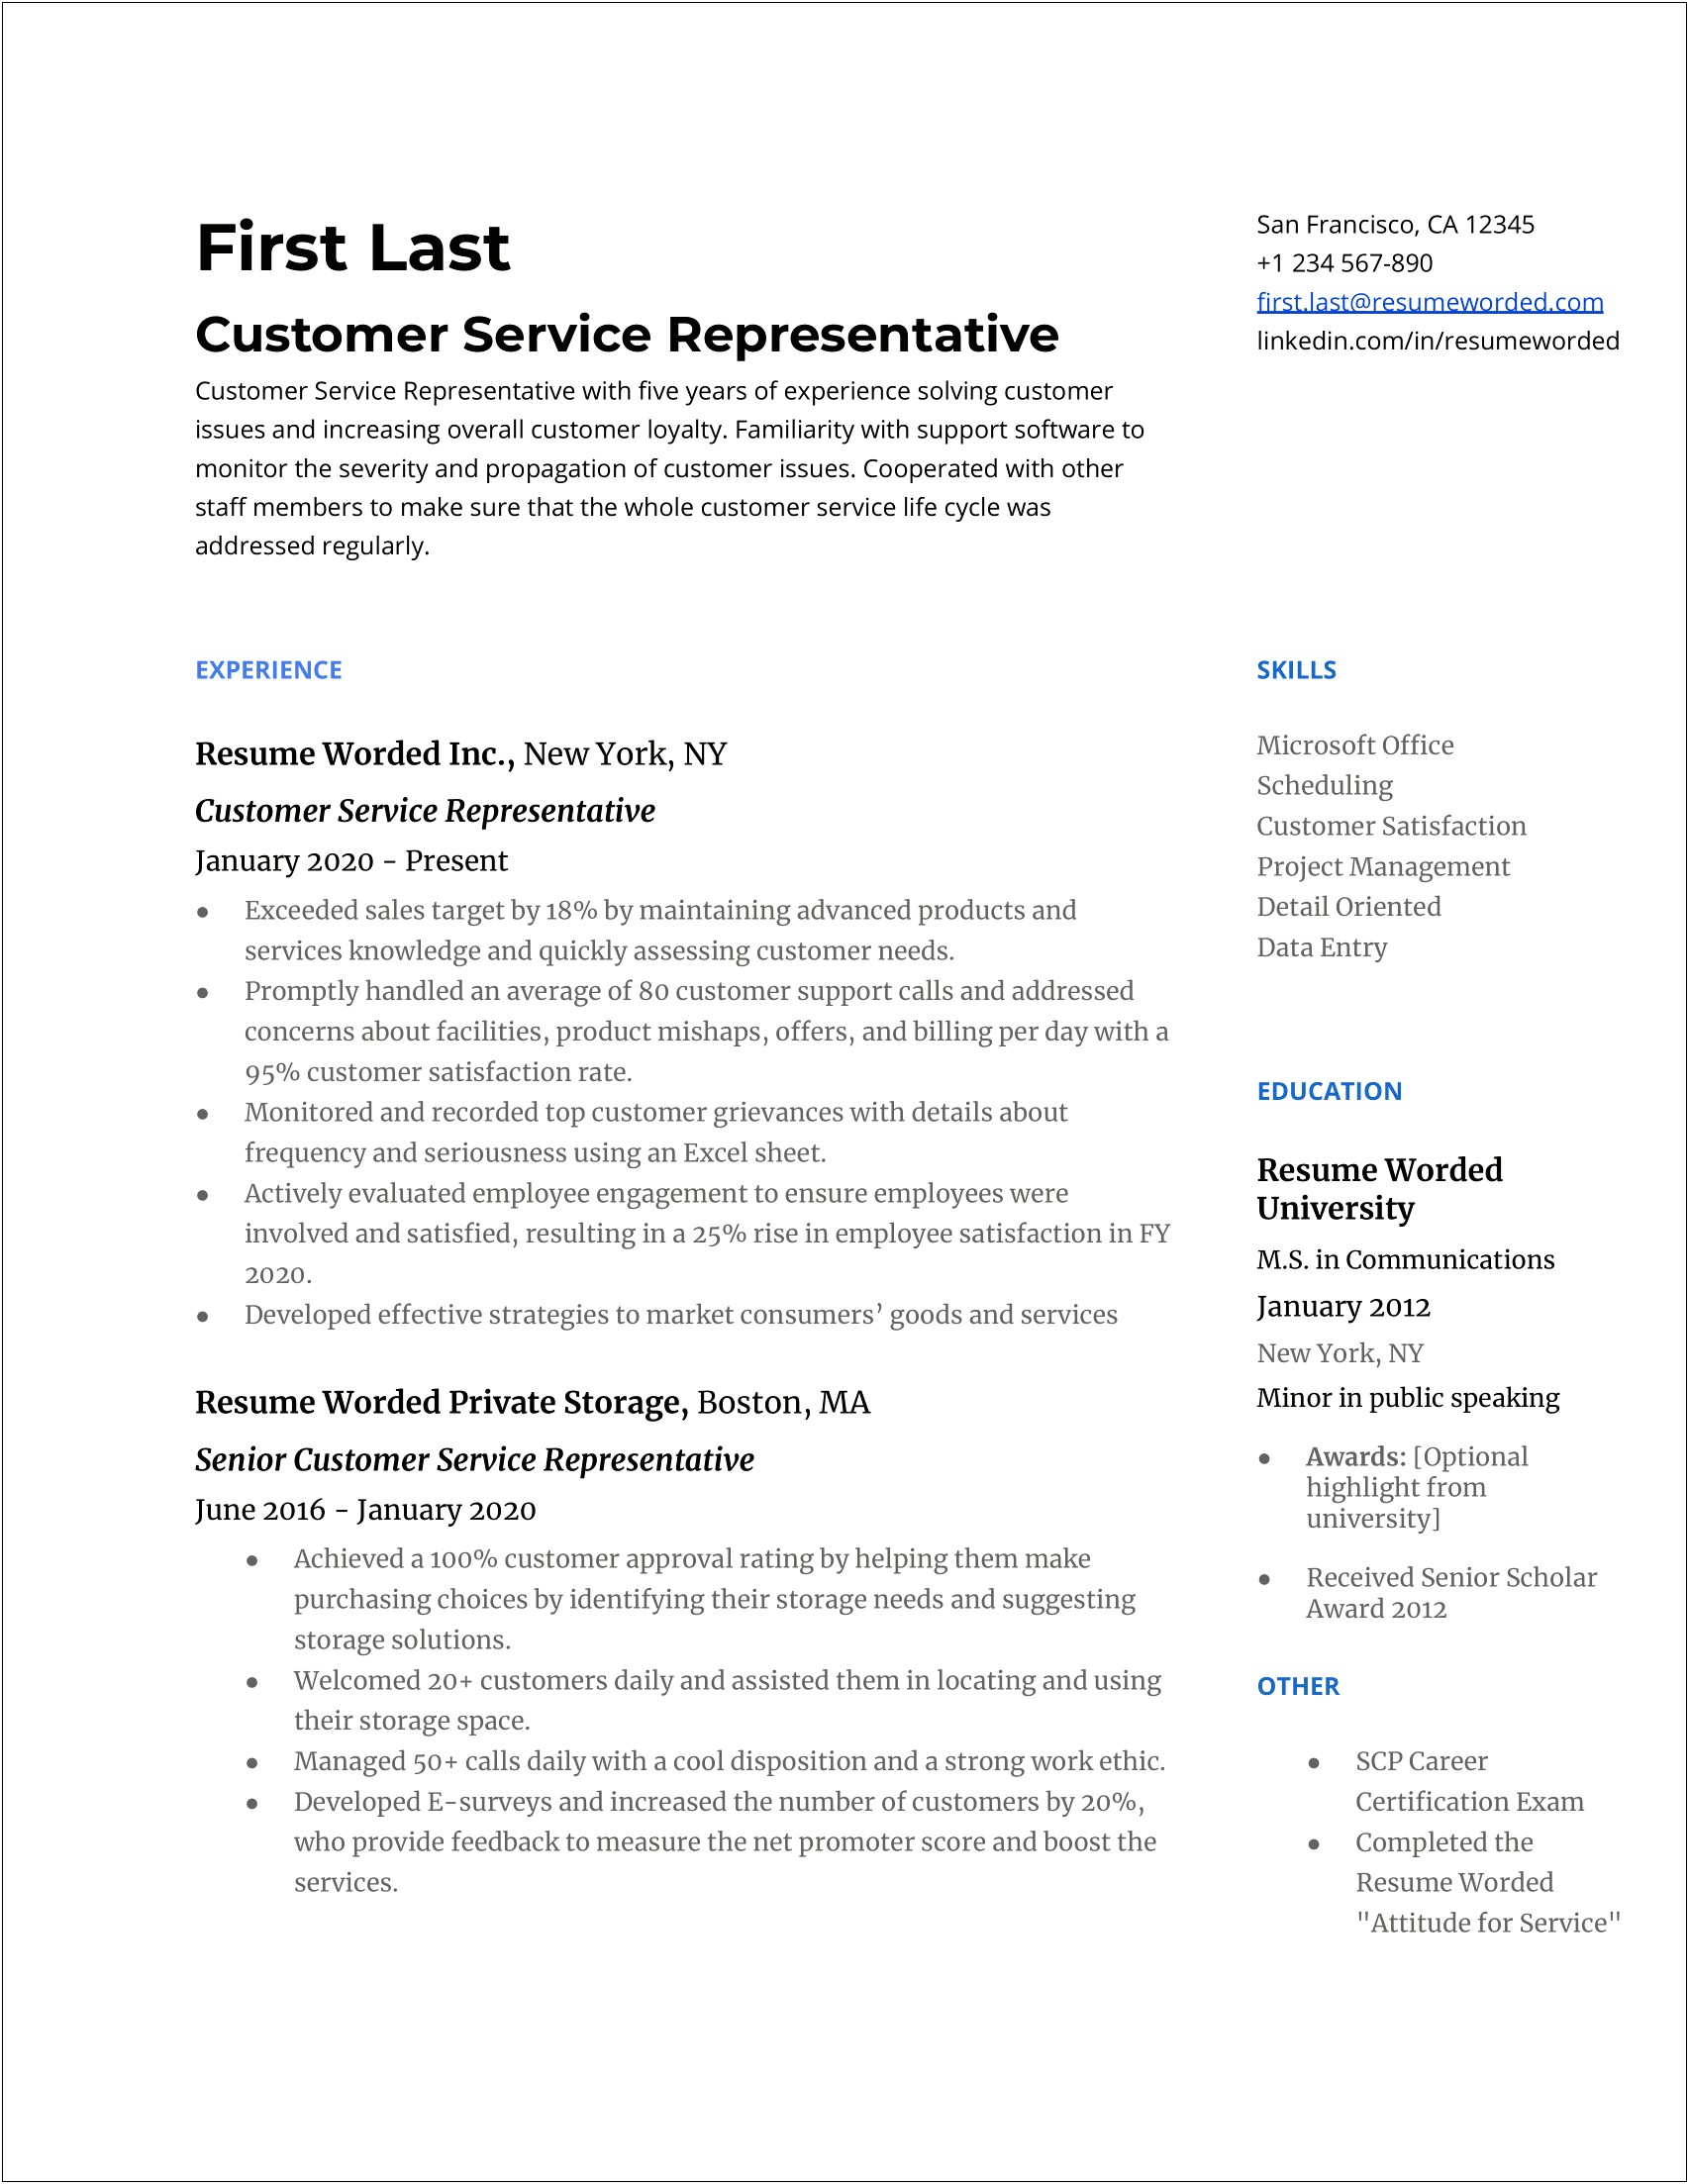 Customer Service Experience Resume Examples